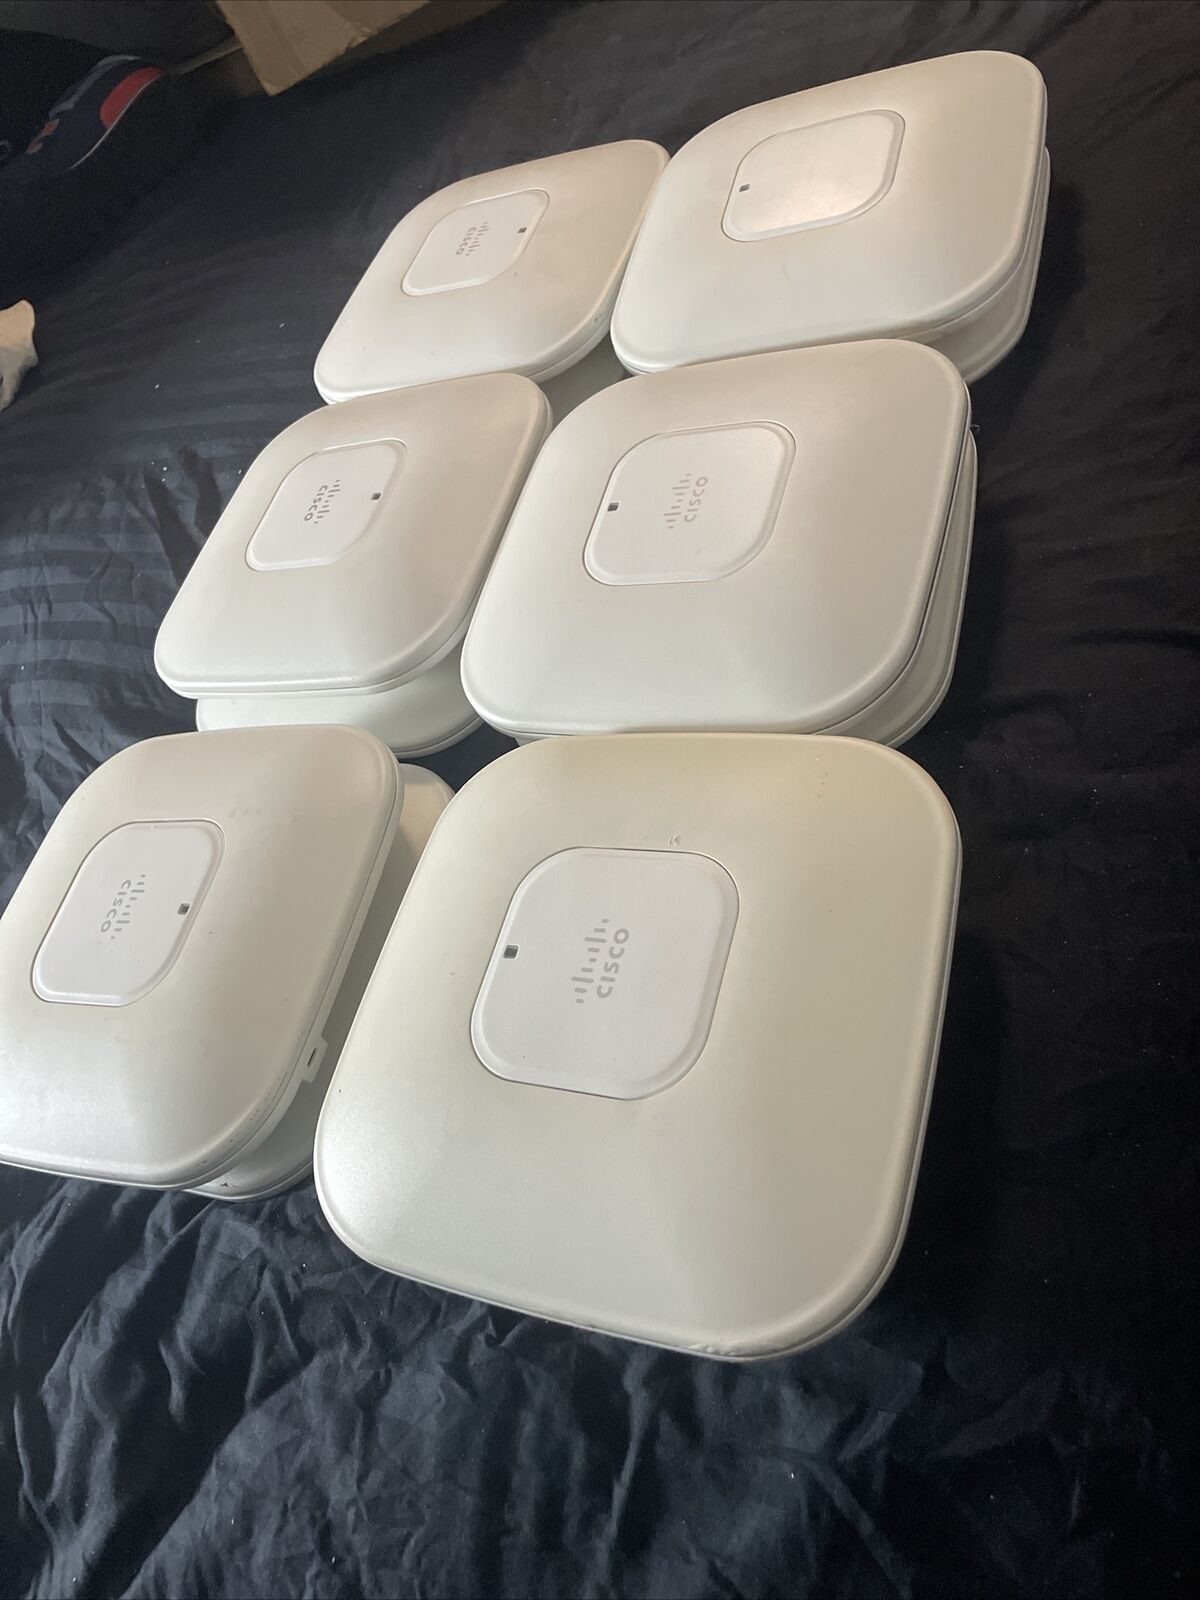 Lot of 12 Cisco AIR-LAP1142N-A-K9 Dual Band Wireless Access Point Wi-Fi Hotspot